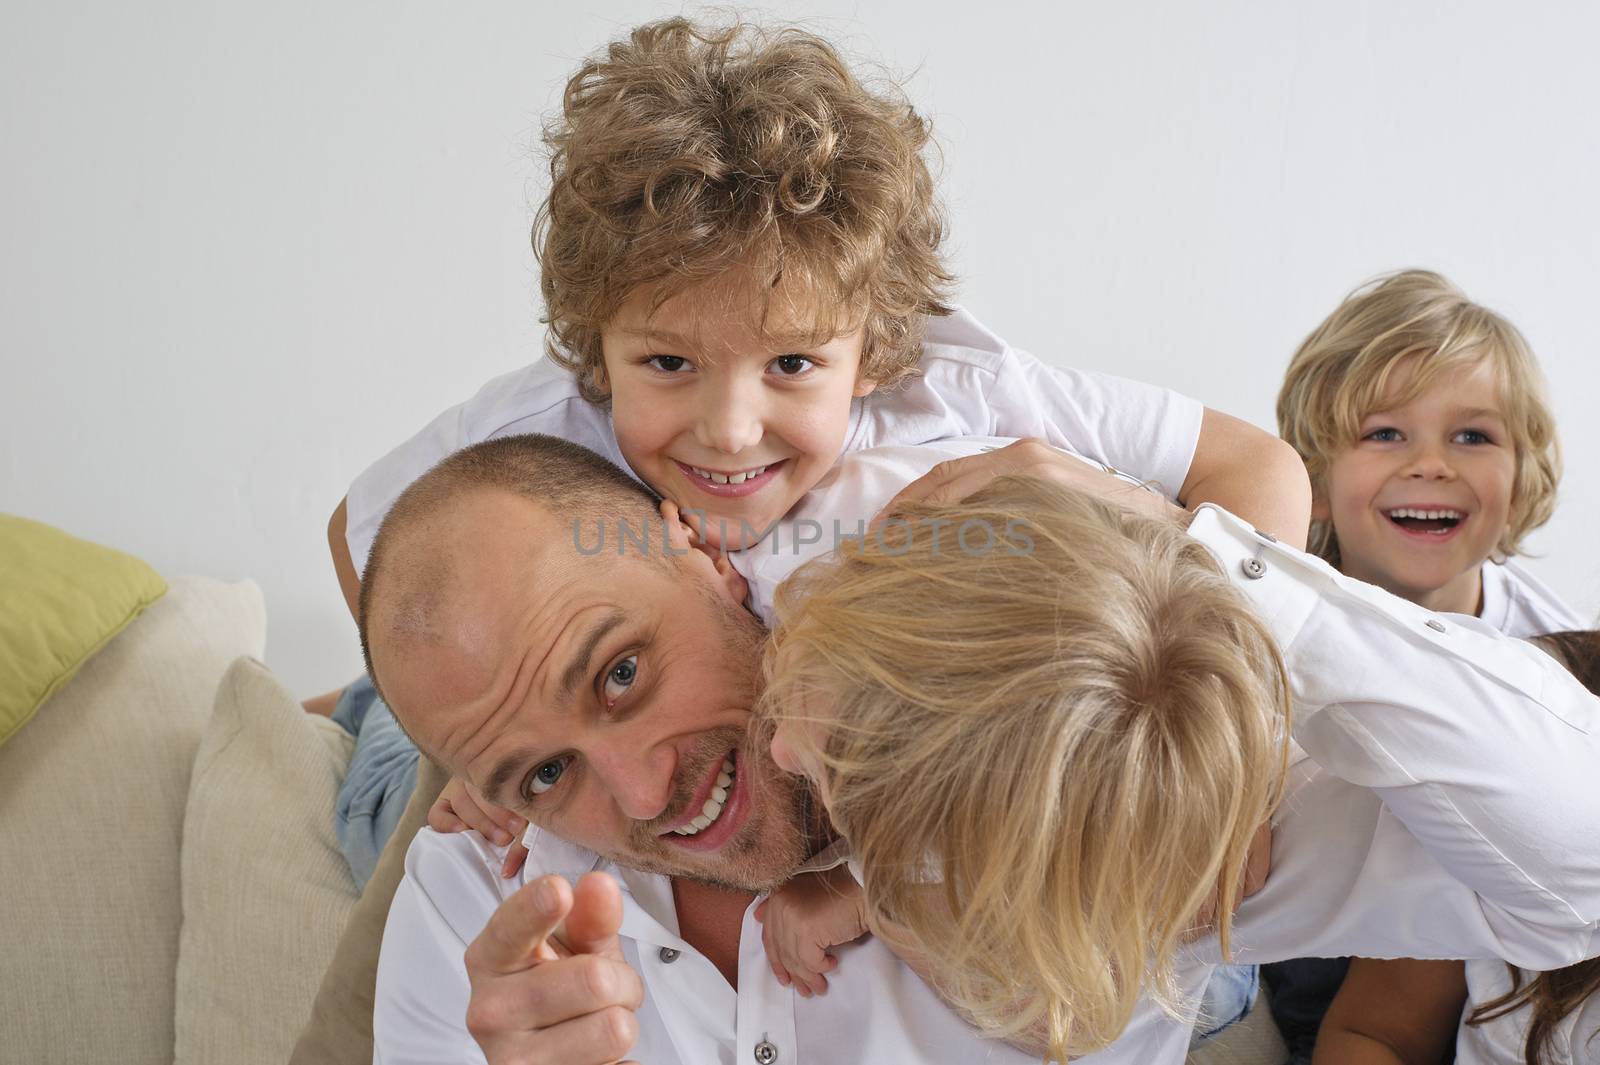 Children climbing over their father on the sofa